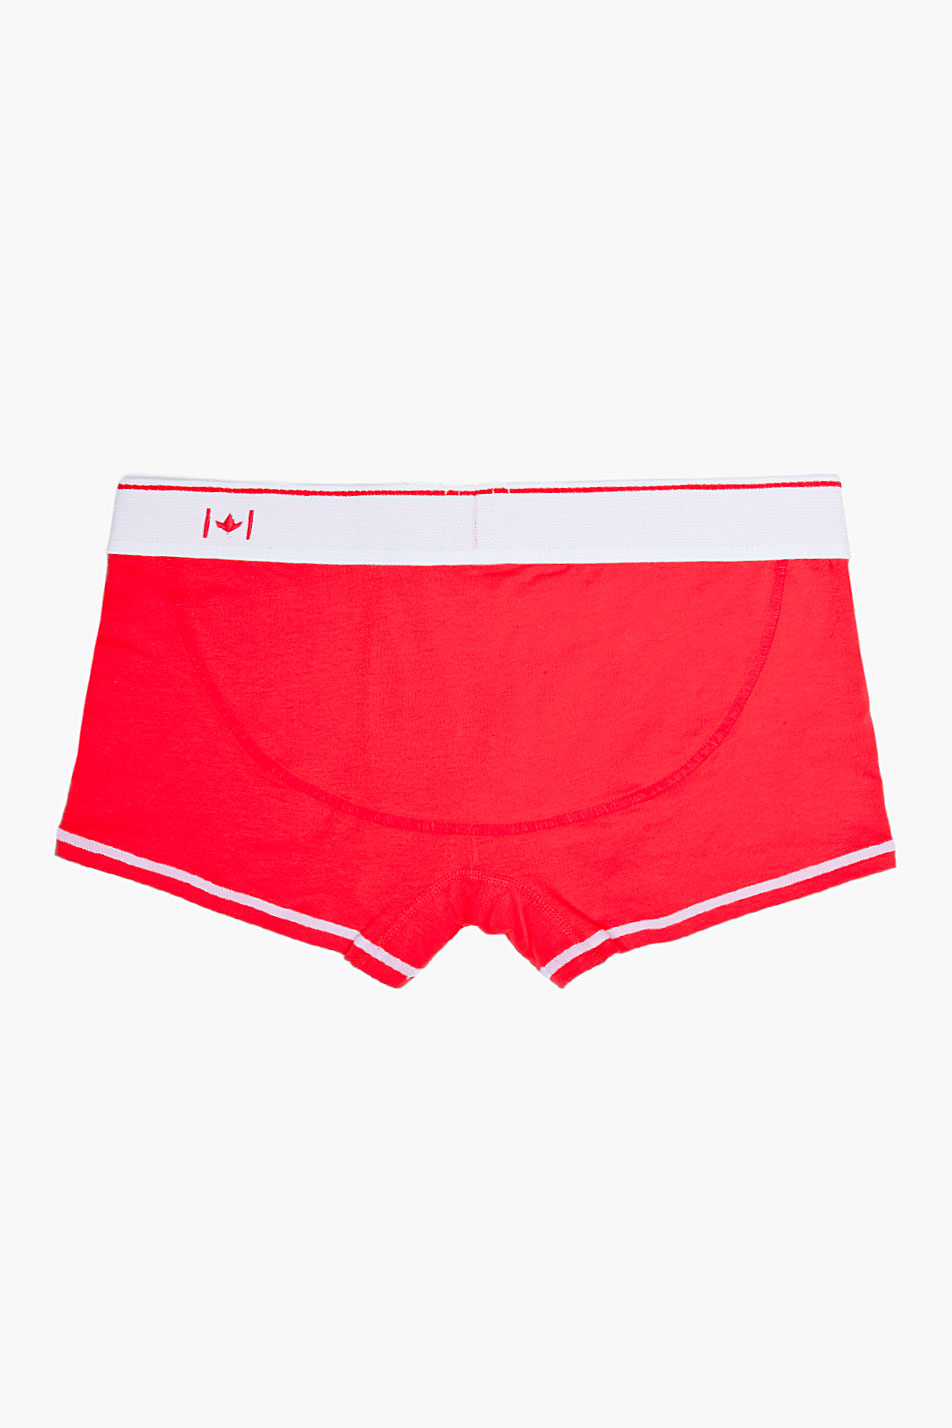 Lyst - Diesel Umbx Divine Canada Flag Boxers in Red for Men